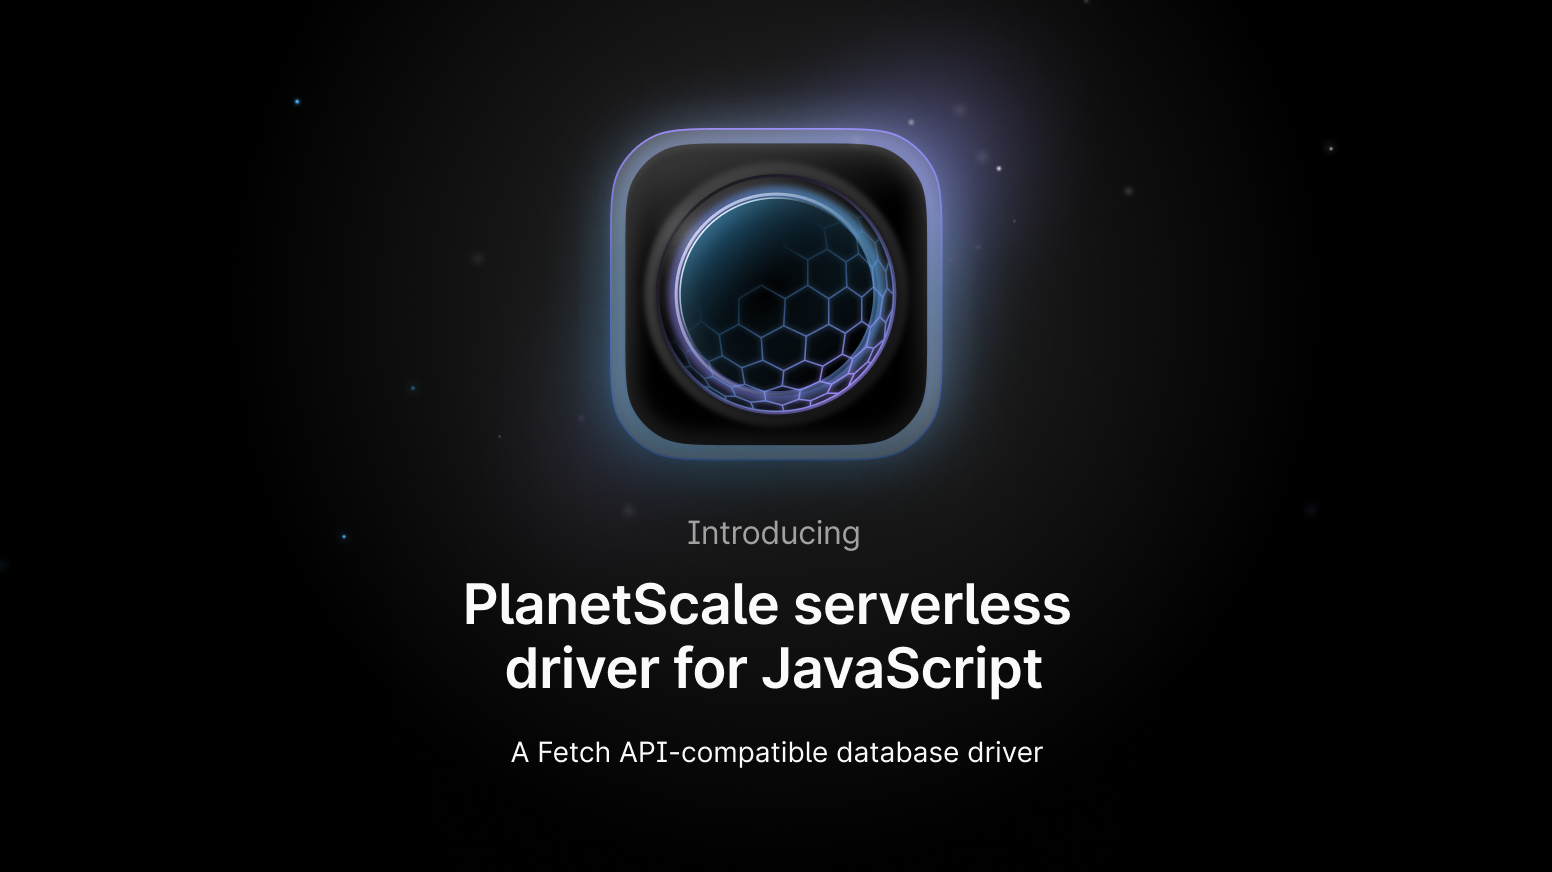 Introducing the PlanetScale serverless driver for JavaScript